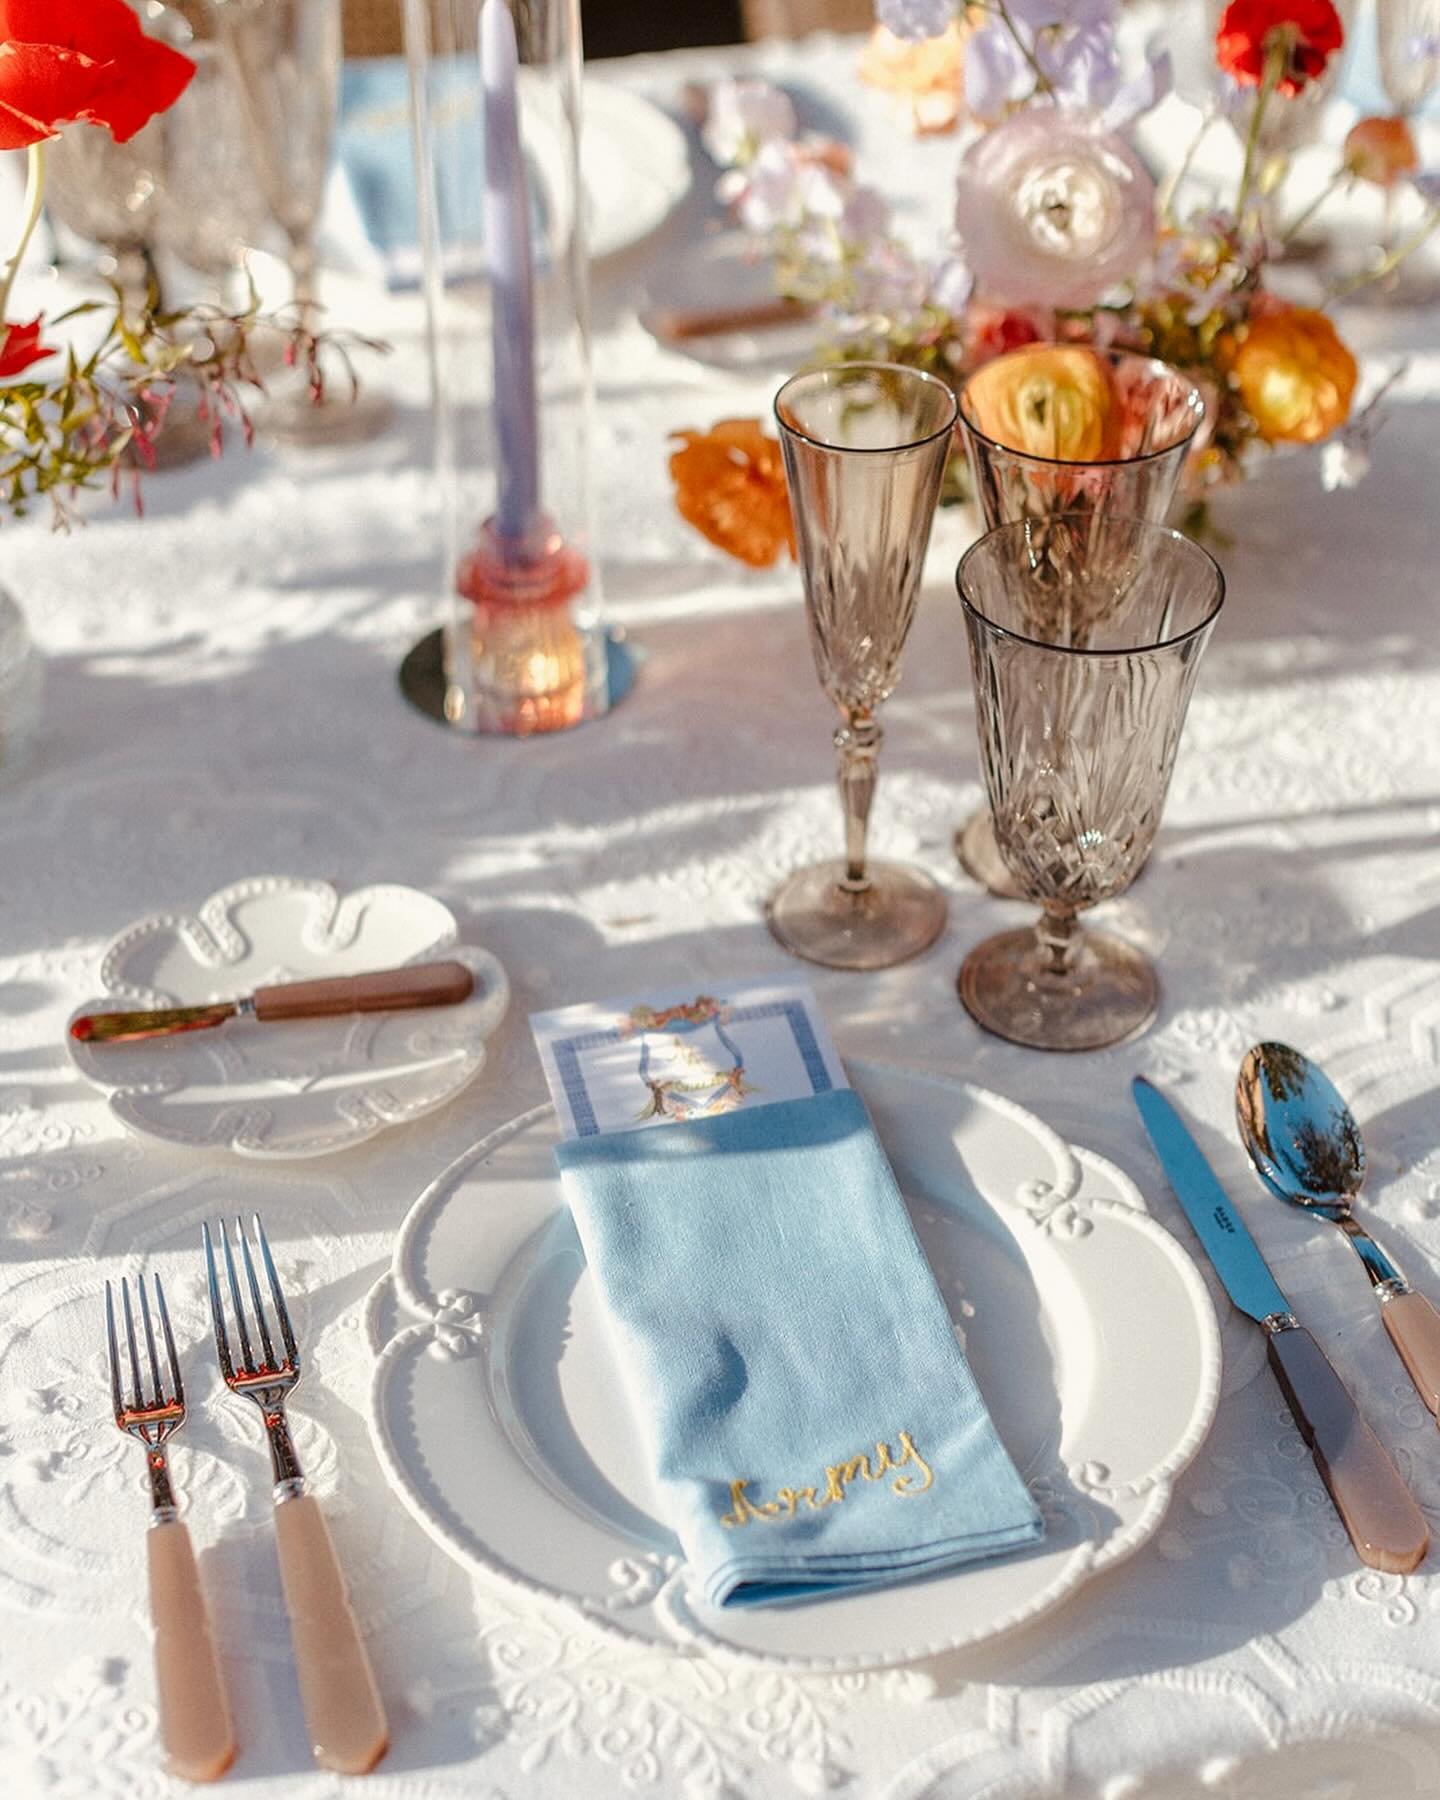 Embroidered napkins as place settings for this gorgeous wedding tablescape! 

Can&rsquo;t wait to share more of the custom embroidery we did for Alice + Alex&rsquo;s special day.